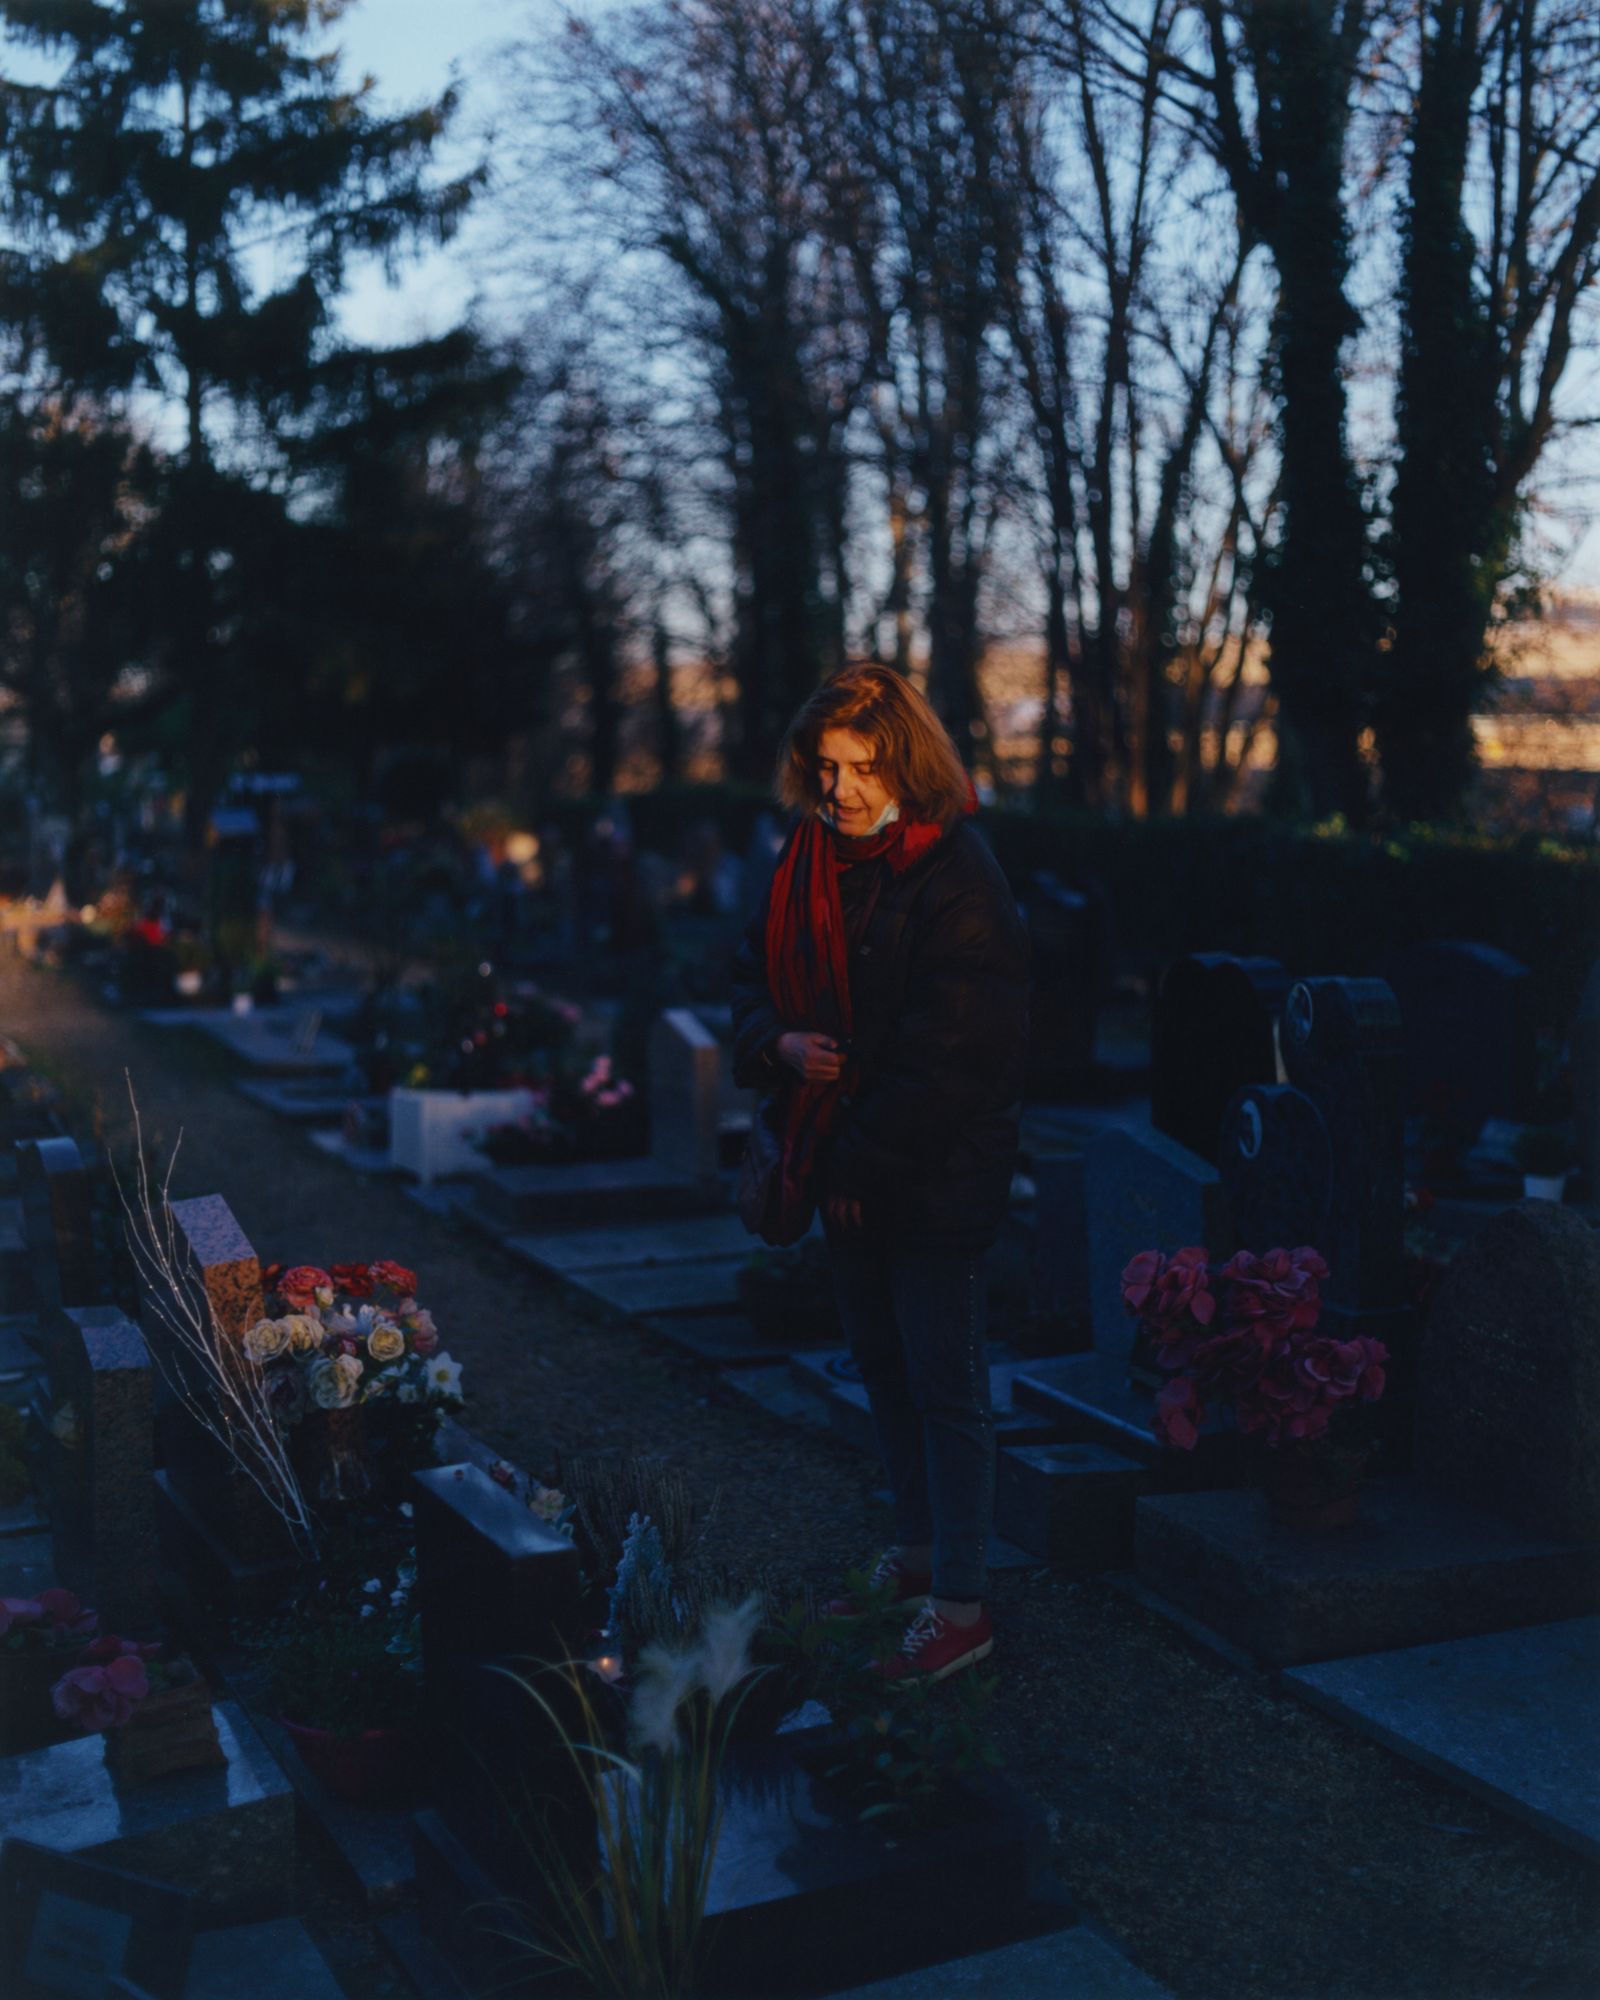 © Alexandre Silberman - Marina, in front of the grave of her dog Caramel